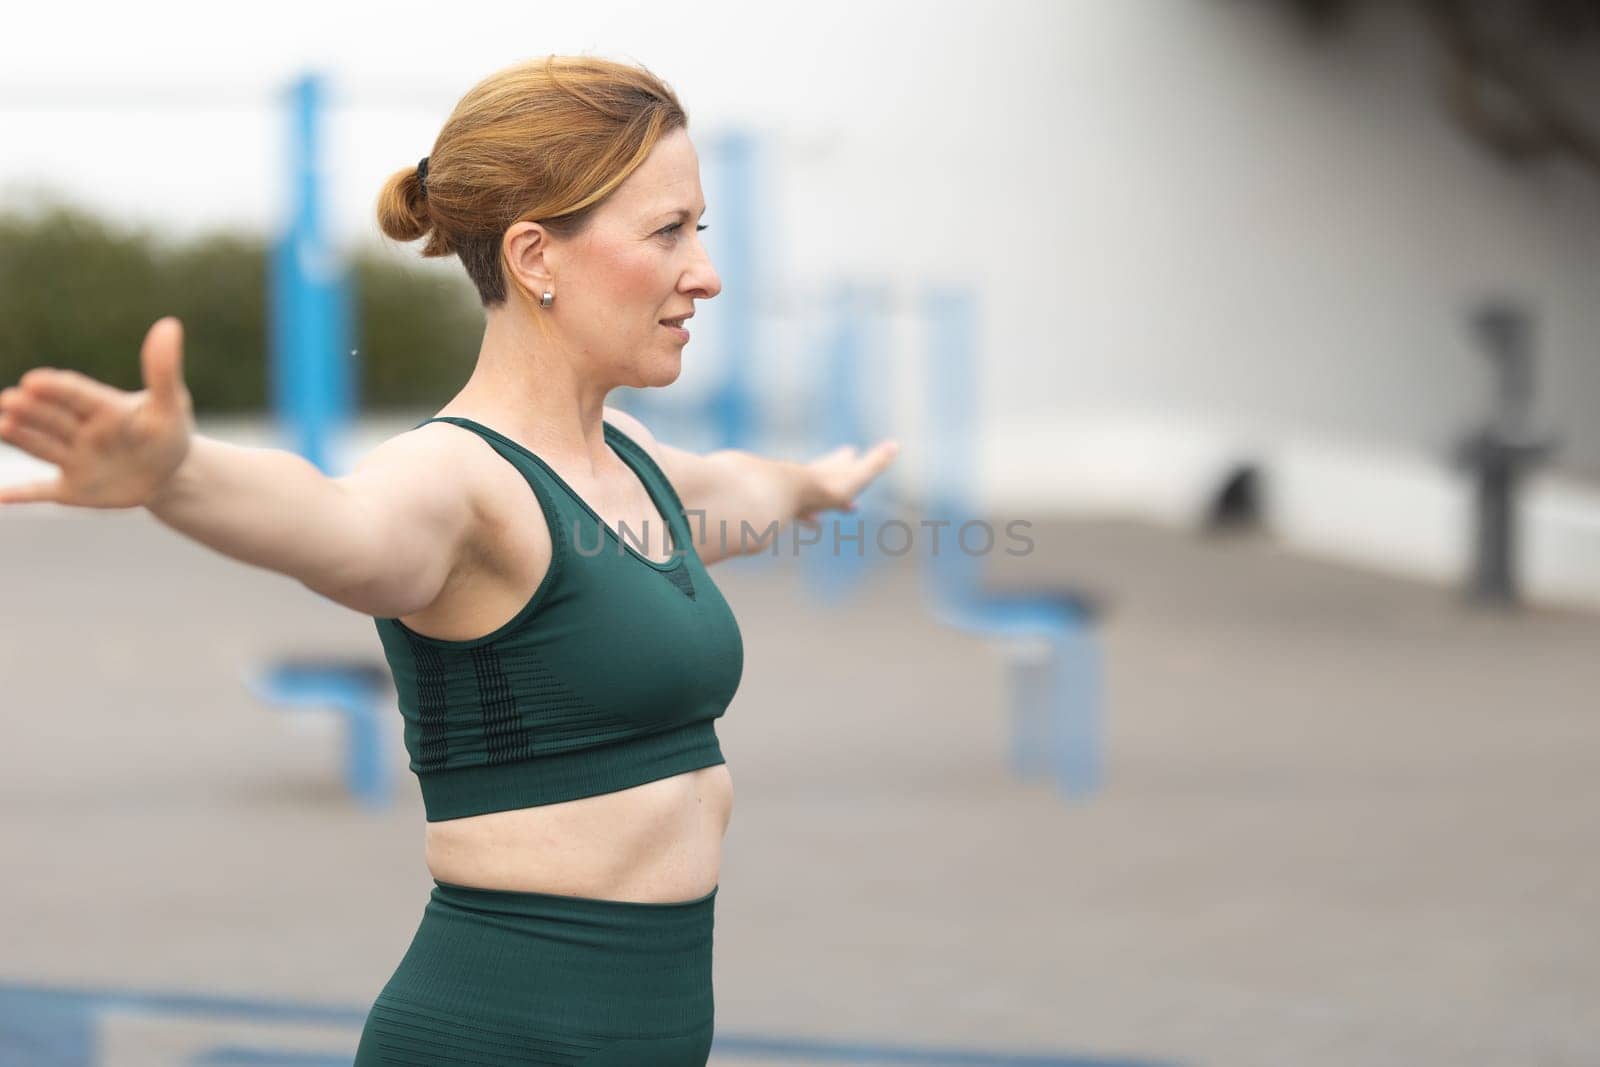 Adult sportive woman stretching out her arms to the sides. Mid shot